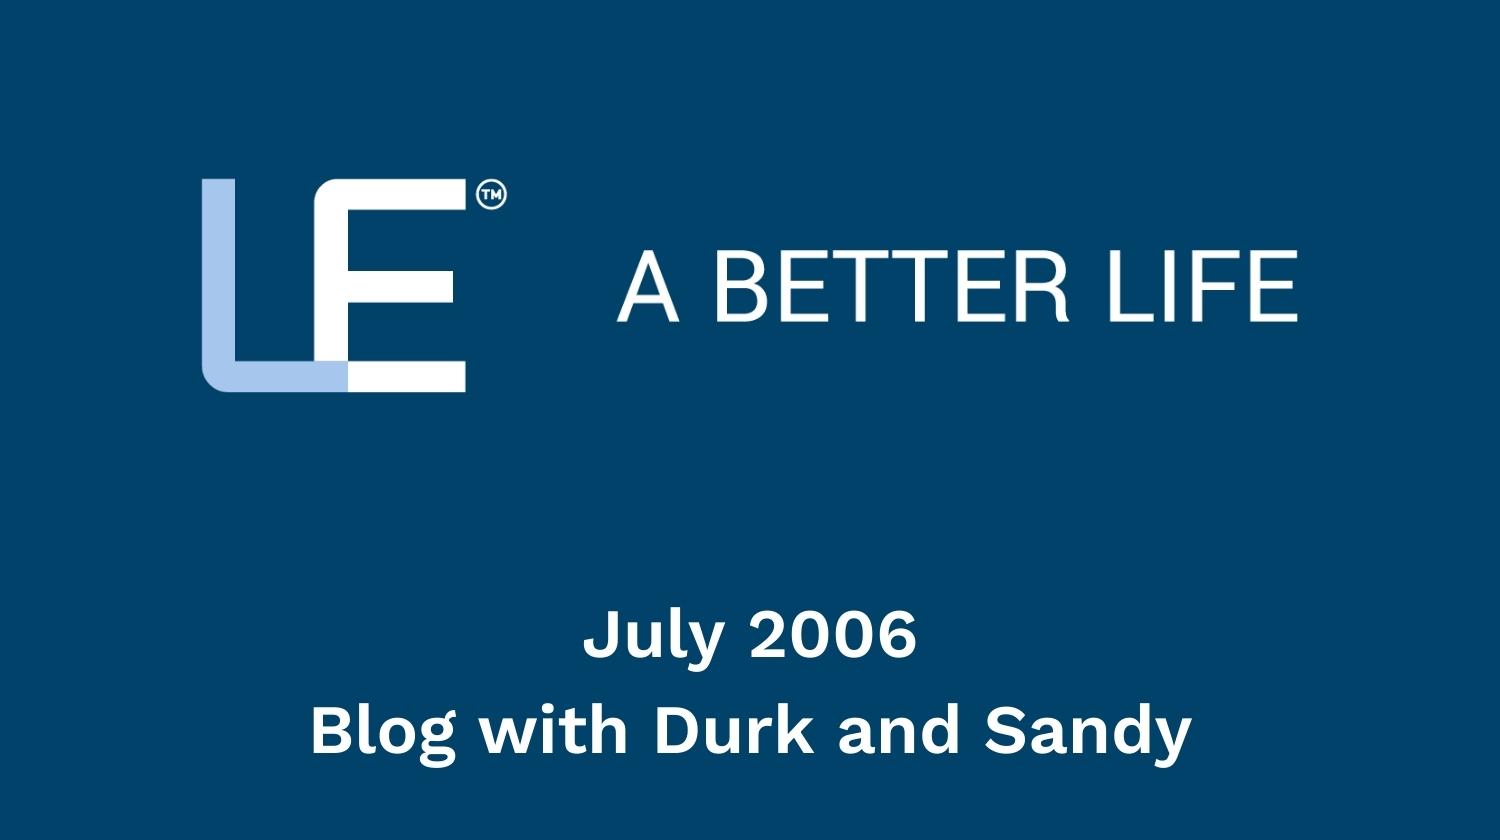 July 2006 Blog with Durk and Sandy